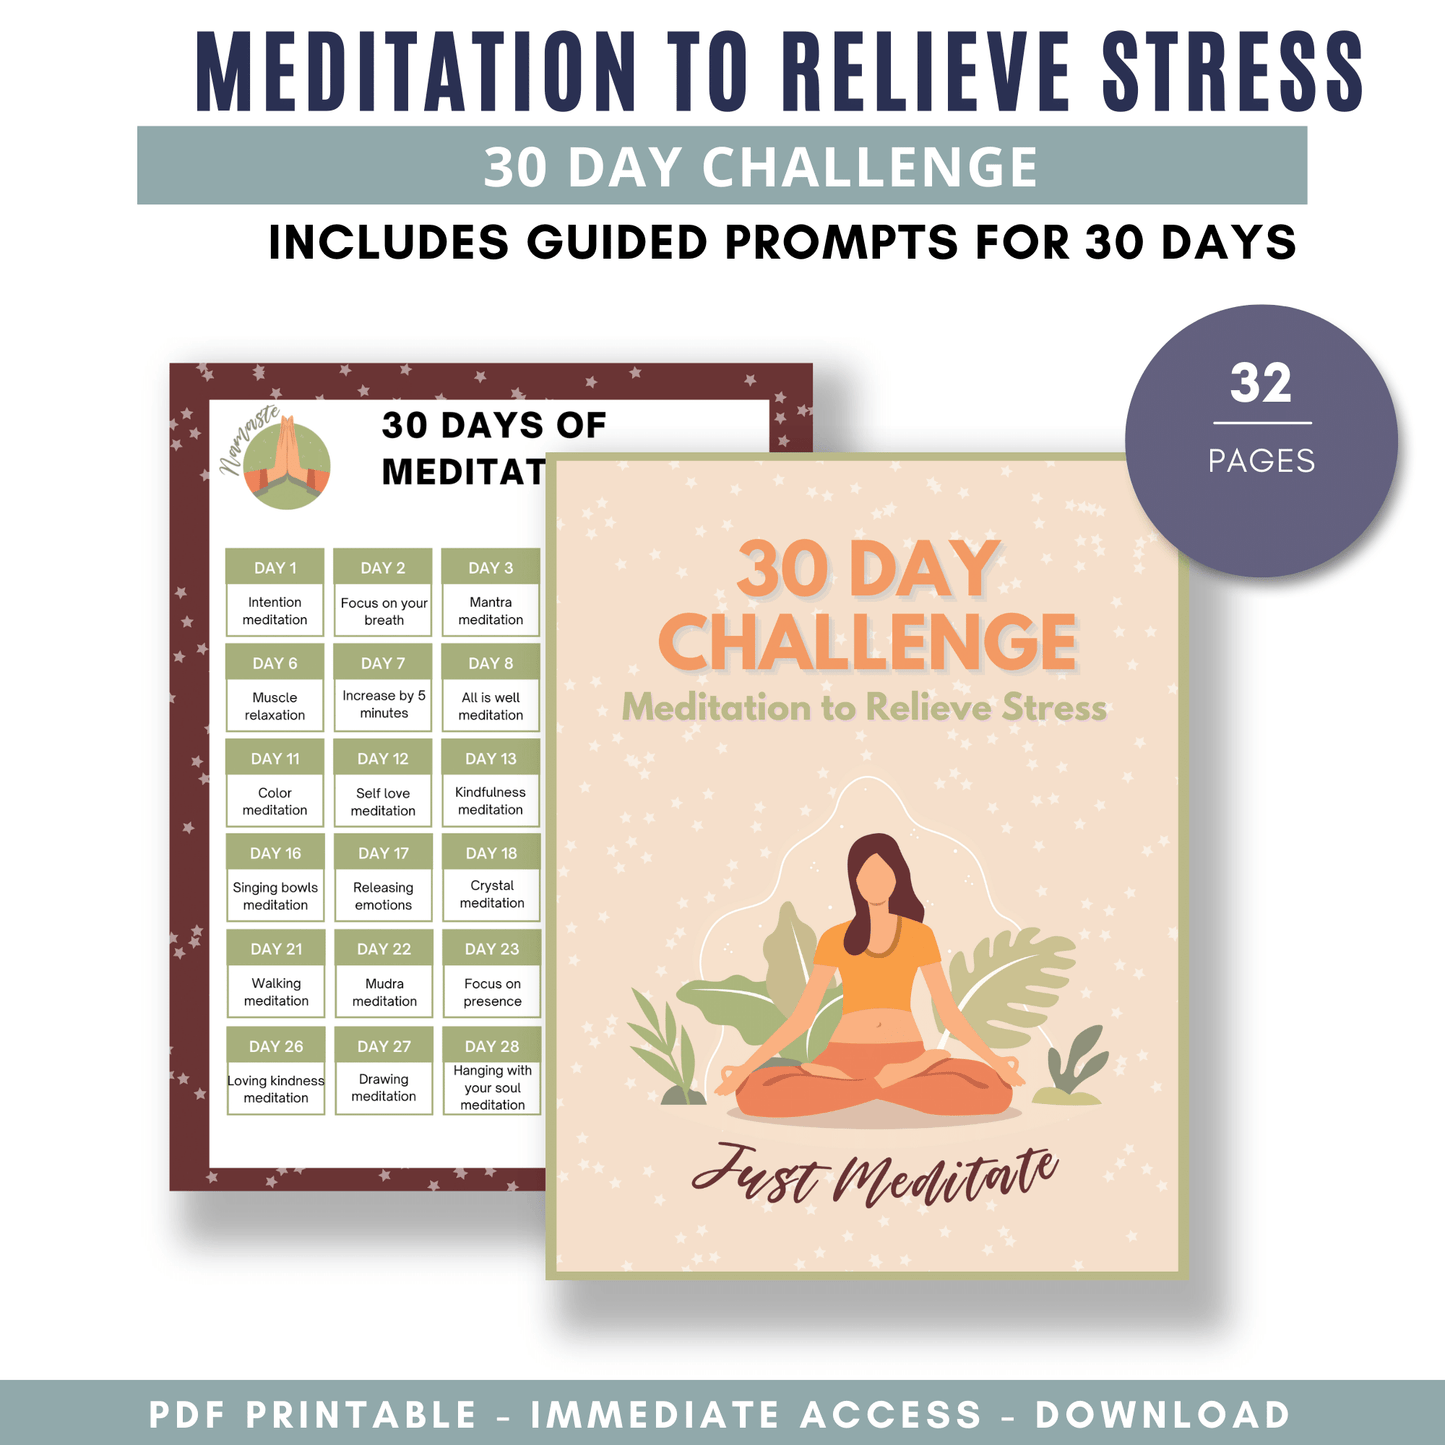 Meditation to Relieve Stress 30 Day Challenge